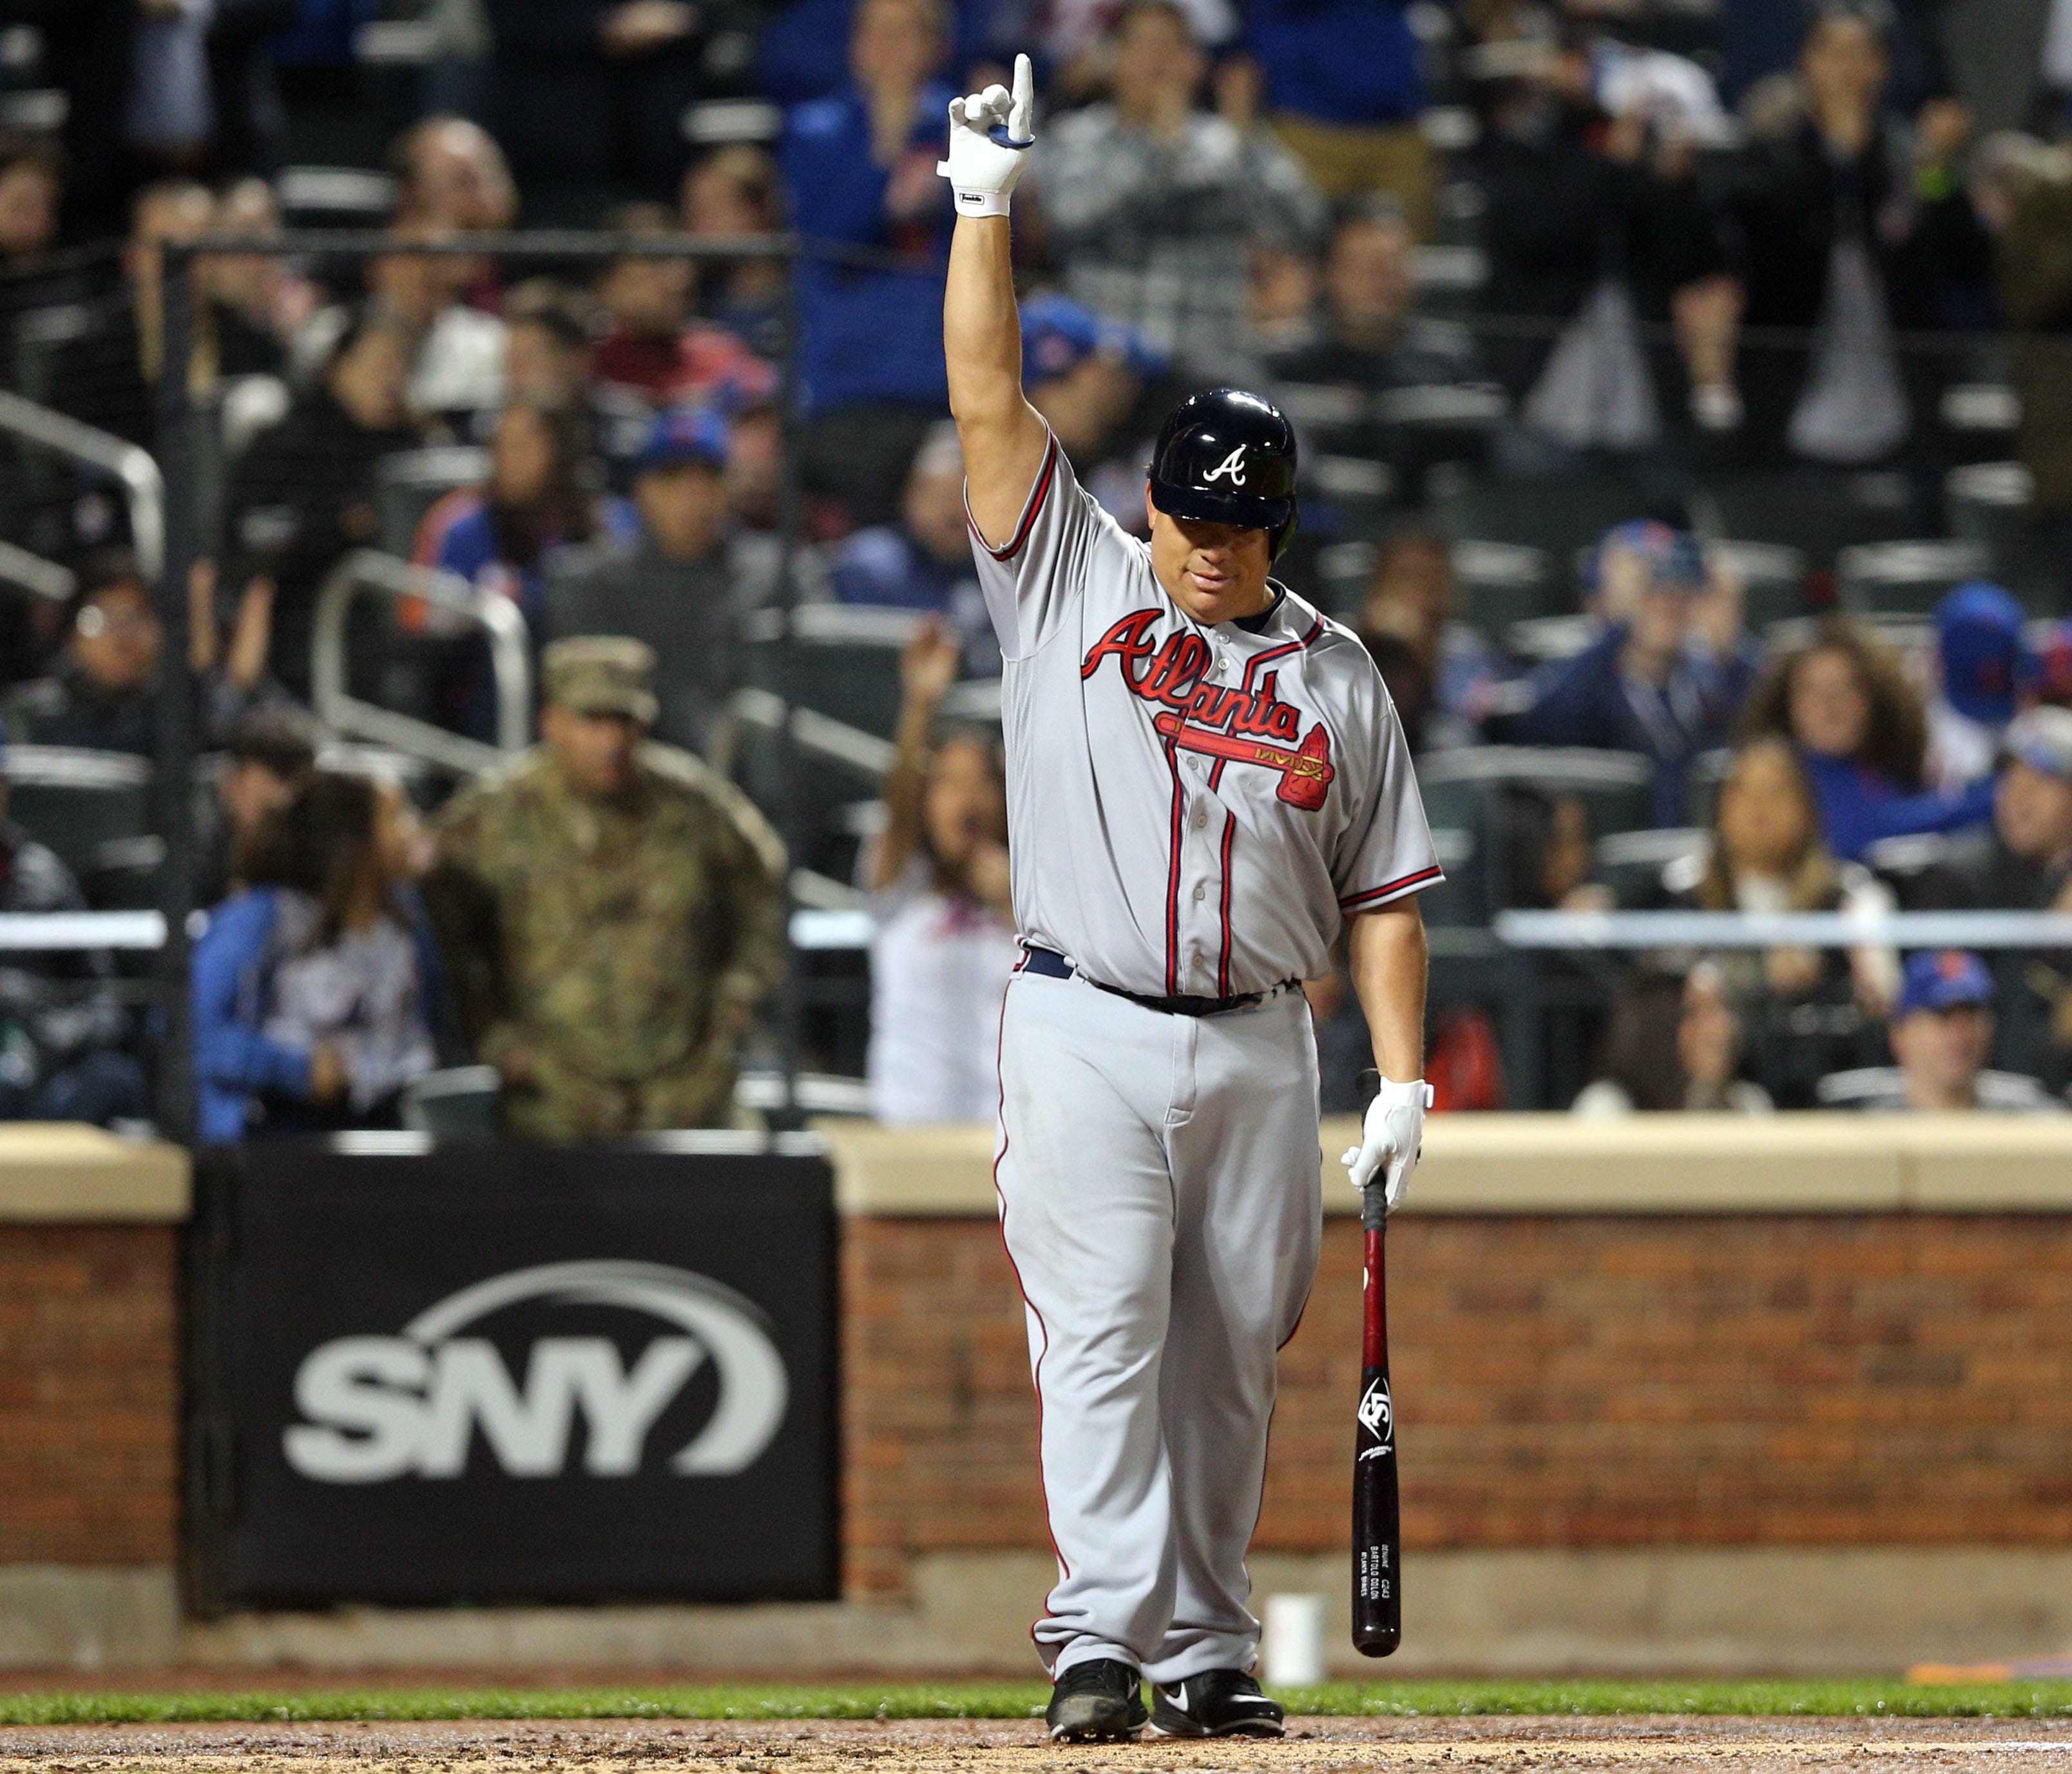 Apr 5, 2017; New York City, NY, USA; Atlanta Braves starting pitcher Bartolo Colon (40) acknowledges the fans as he bats during the third inning against the New York Mets at Citi Field. Mandatory Credit: Brad Penner-USA TODAY Sports ORG XMIT: USATSI-